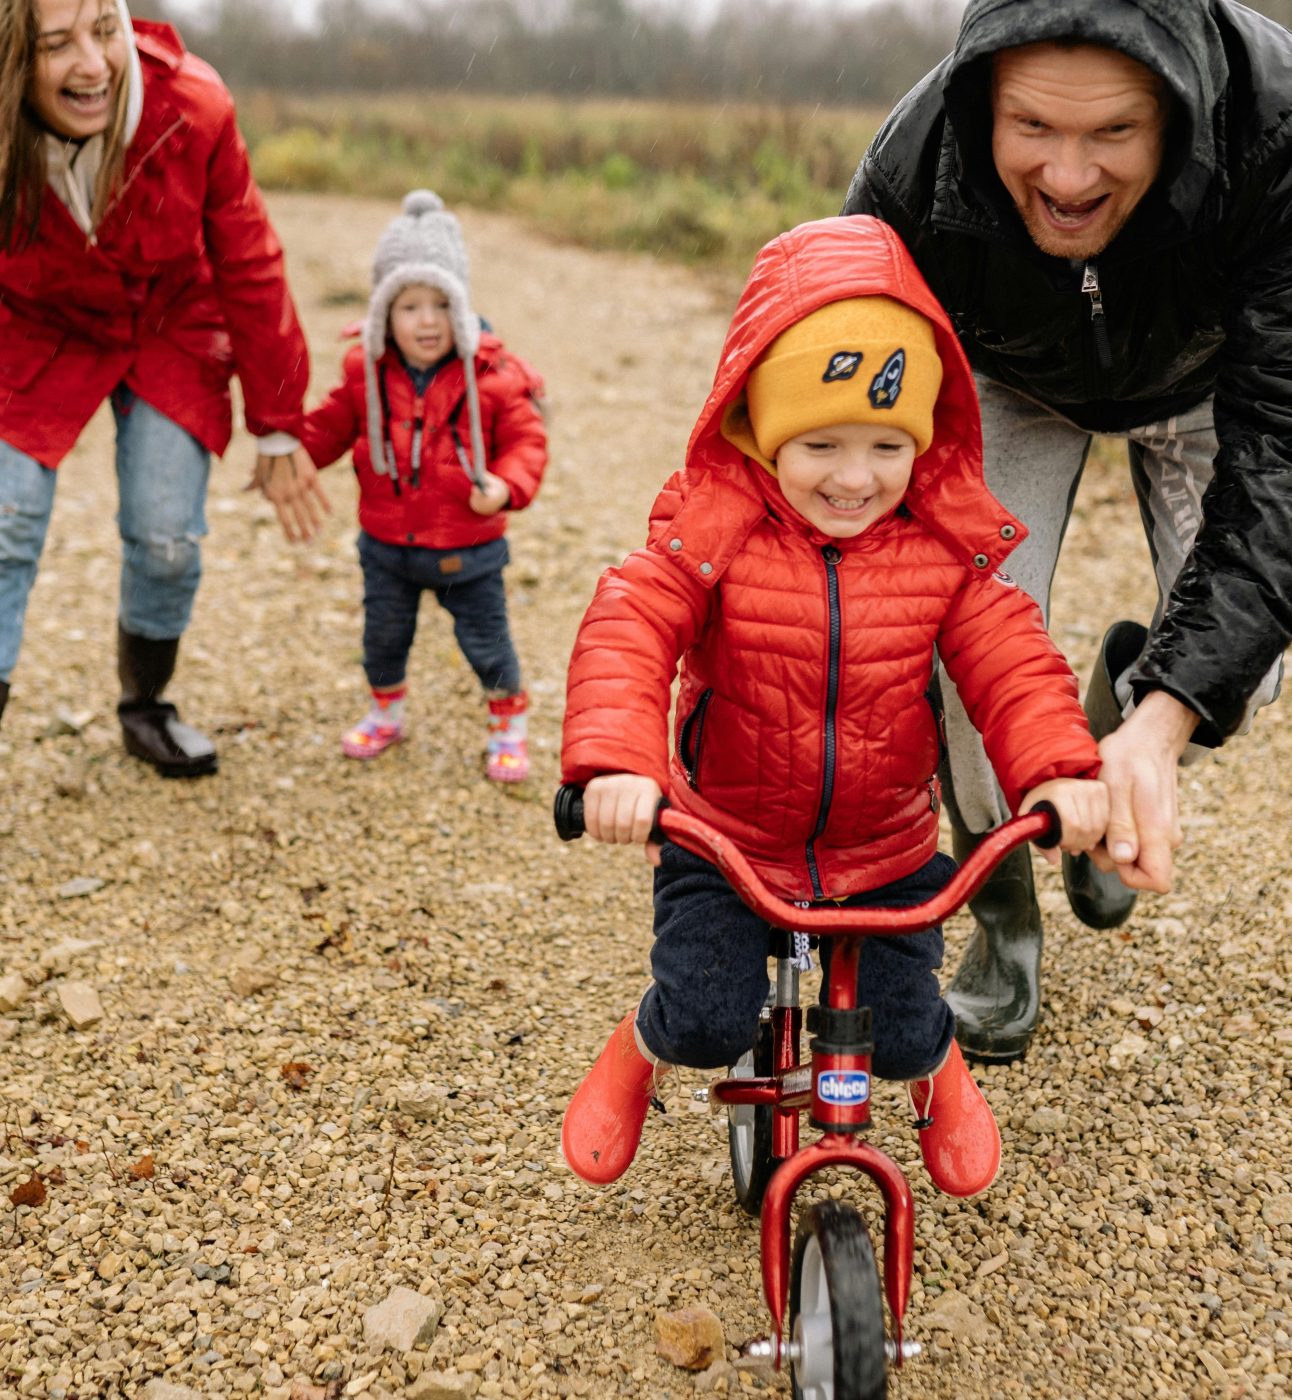 Dad helps young son learn to ride bike while mum and younger brother watch in the background.